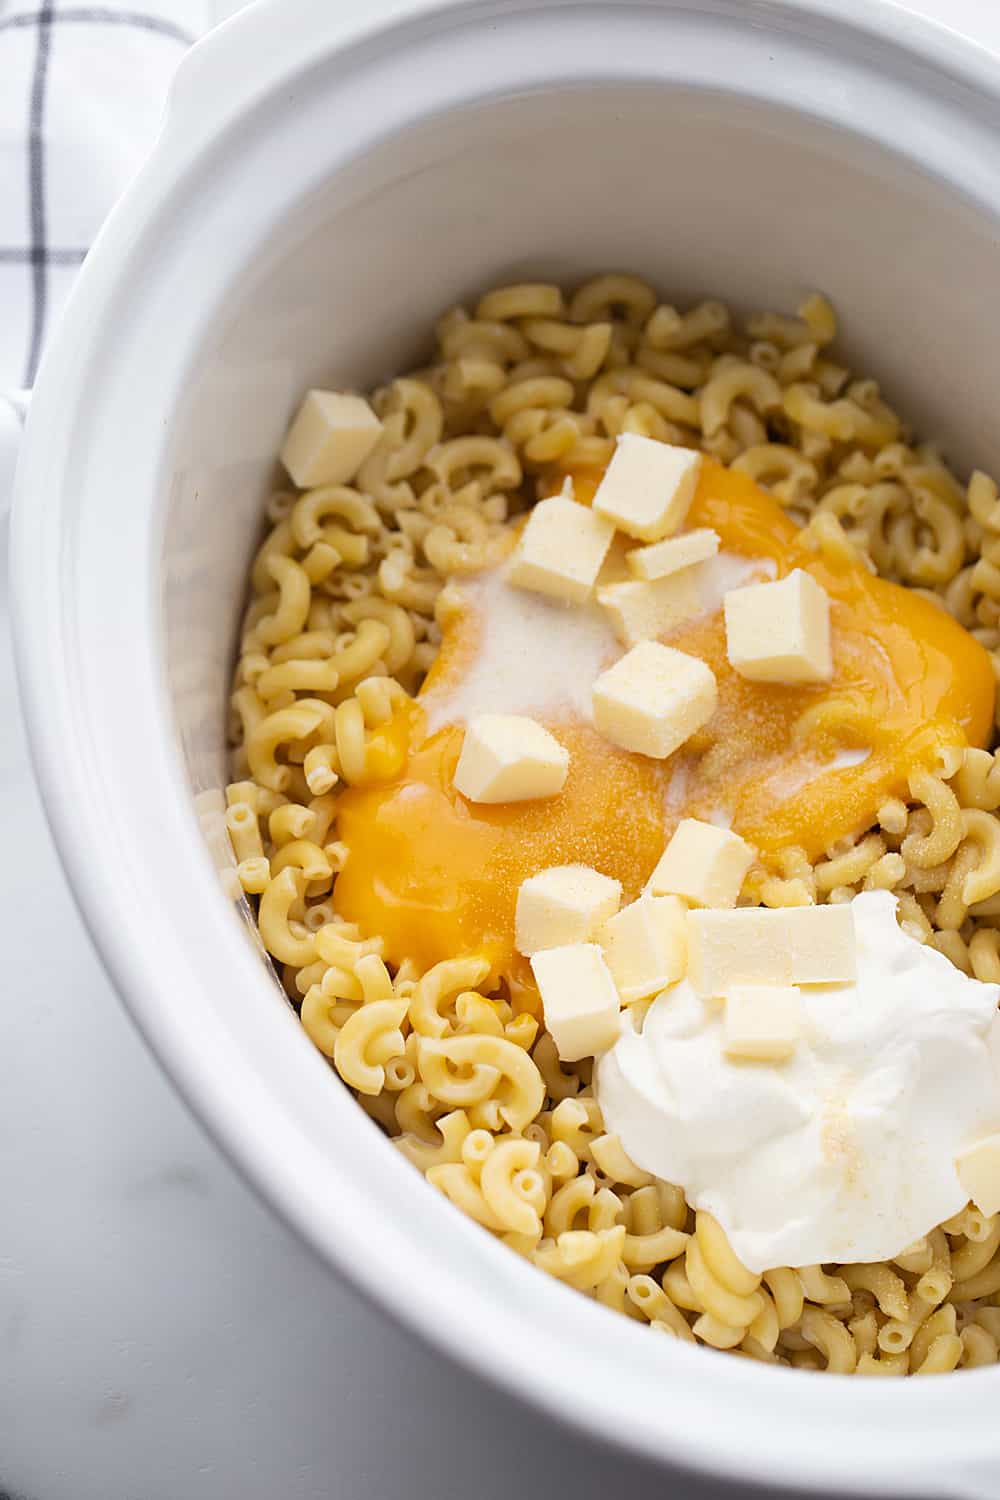 Easy Slow Cooker Mac and Cheese - Even the pickiest eaters will love easy slow cooker mac and cheese: a combo of sharp cheddar and Colby Jack plus a few surprise ingredients. #macandcheese #easyrecipe #halfscratched #slowcooker #pasta